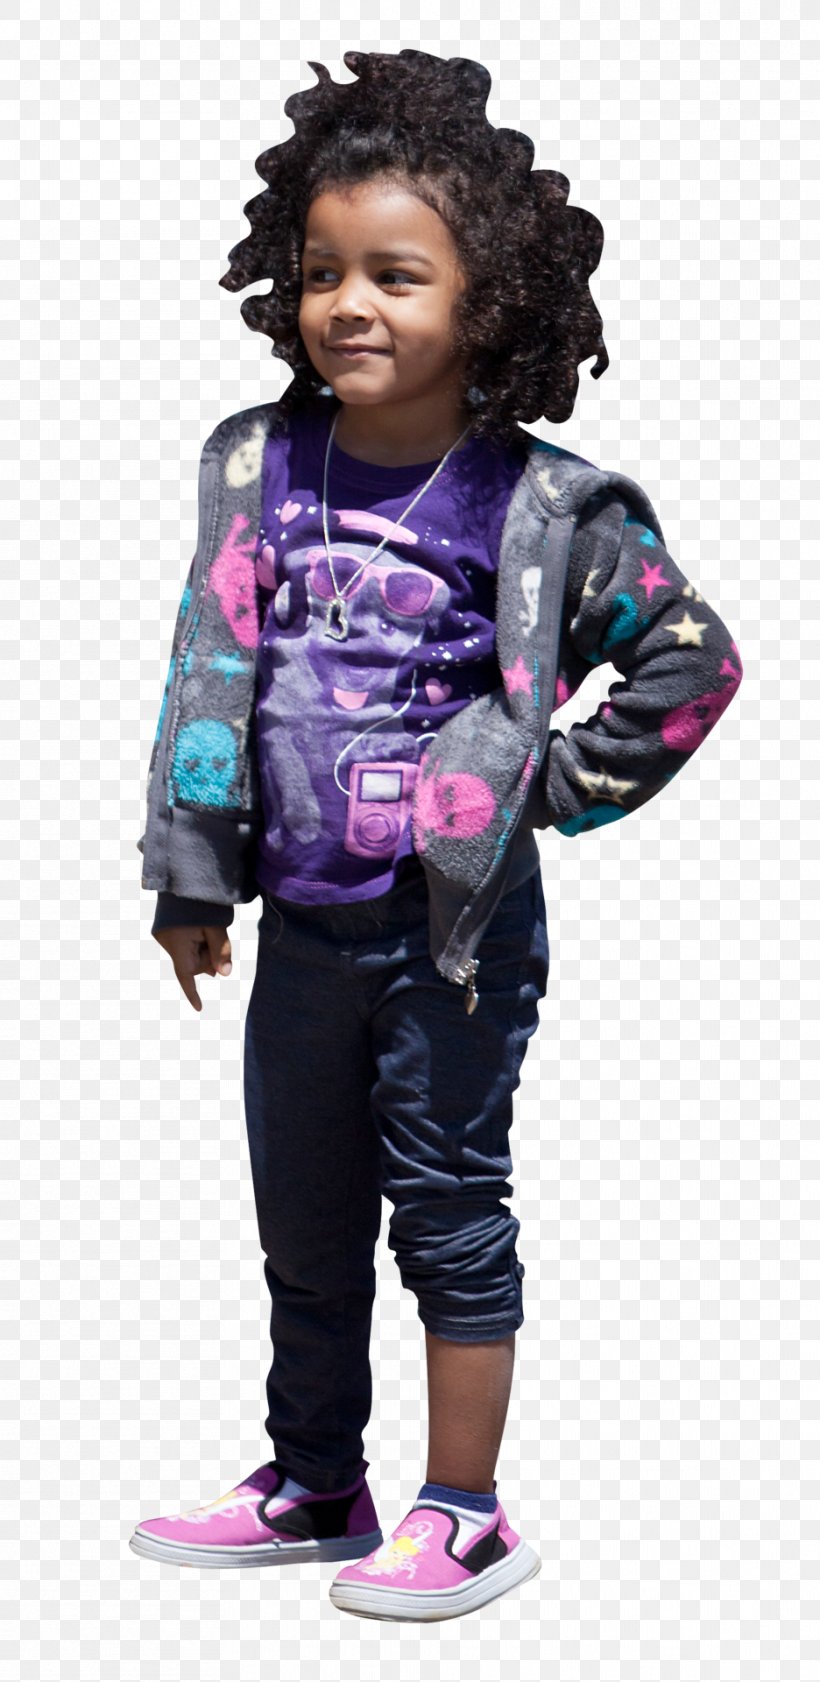 Toddler Child Entourage Outerwear Creative Commons License, PNG, 936x1920px, Toddler, Child, Costume, Creative Commons License, Entourage Download Free